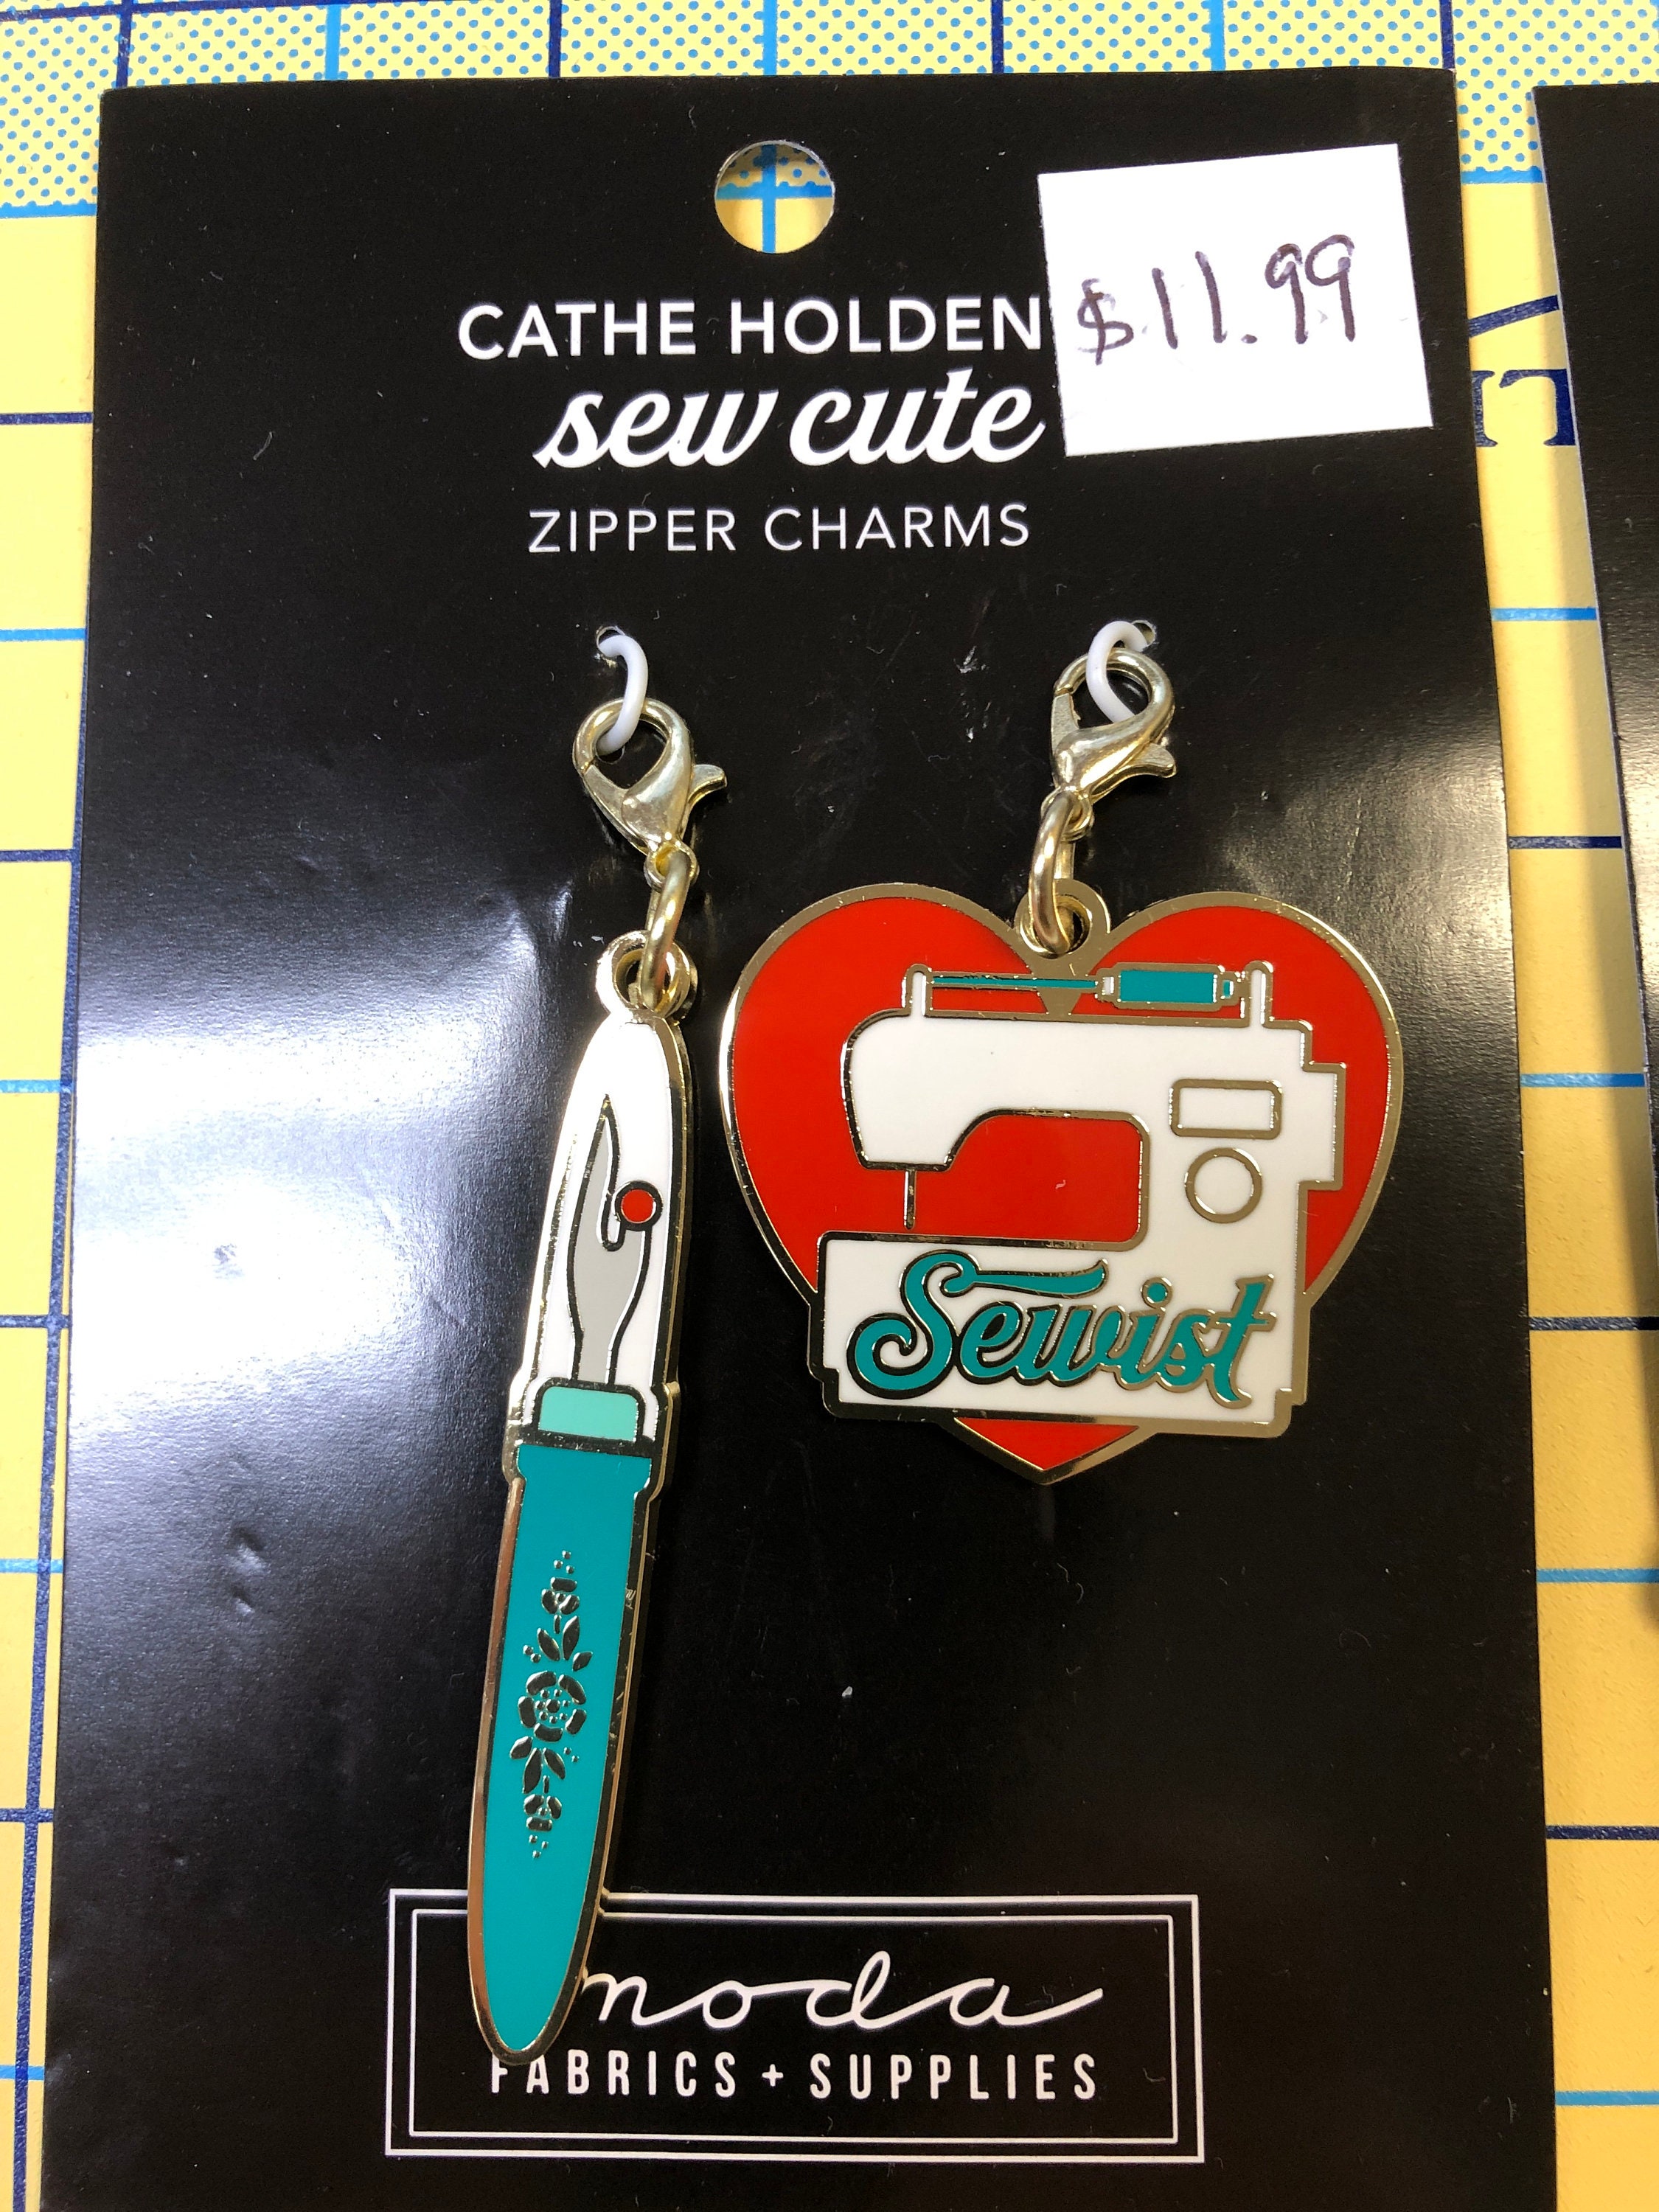 Bobbins/Scissor Zipper Pull or Sewing Charm by Cathe Holden